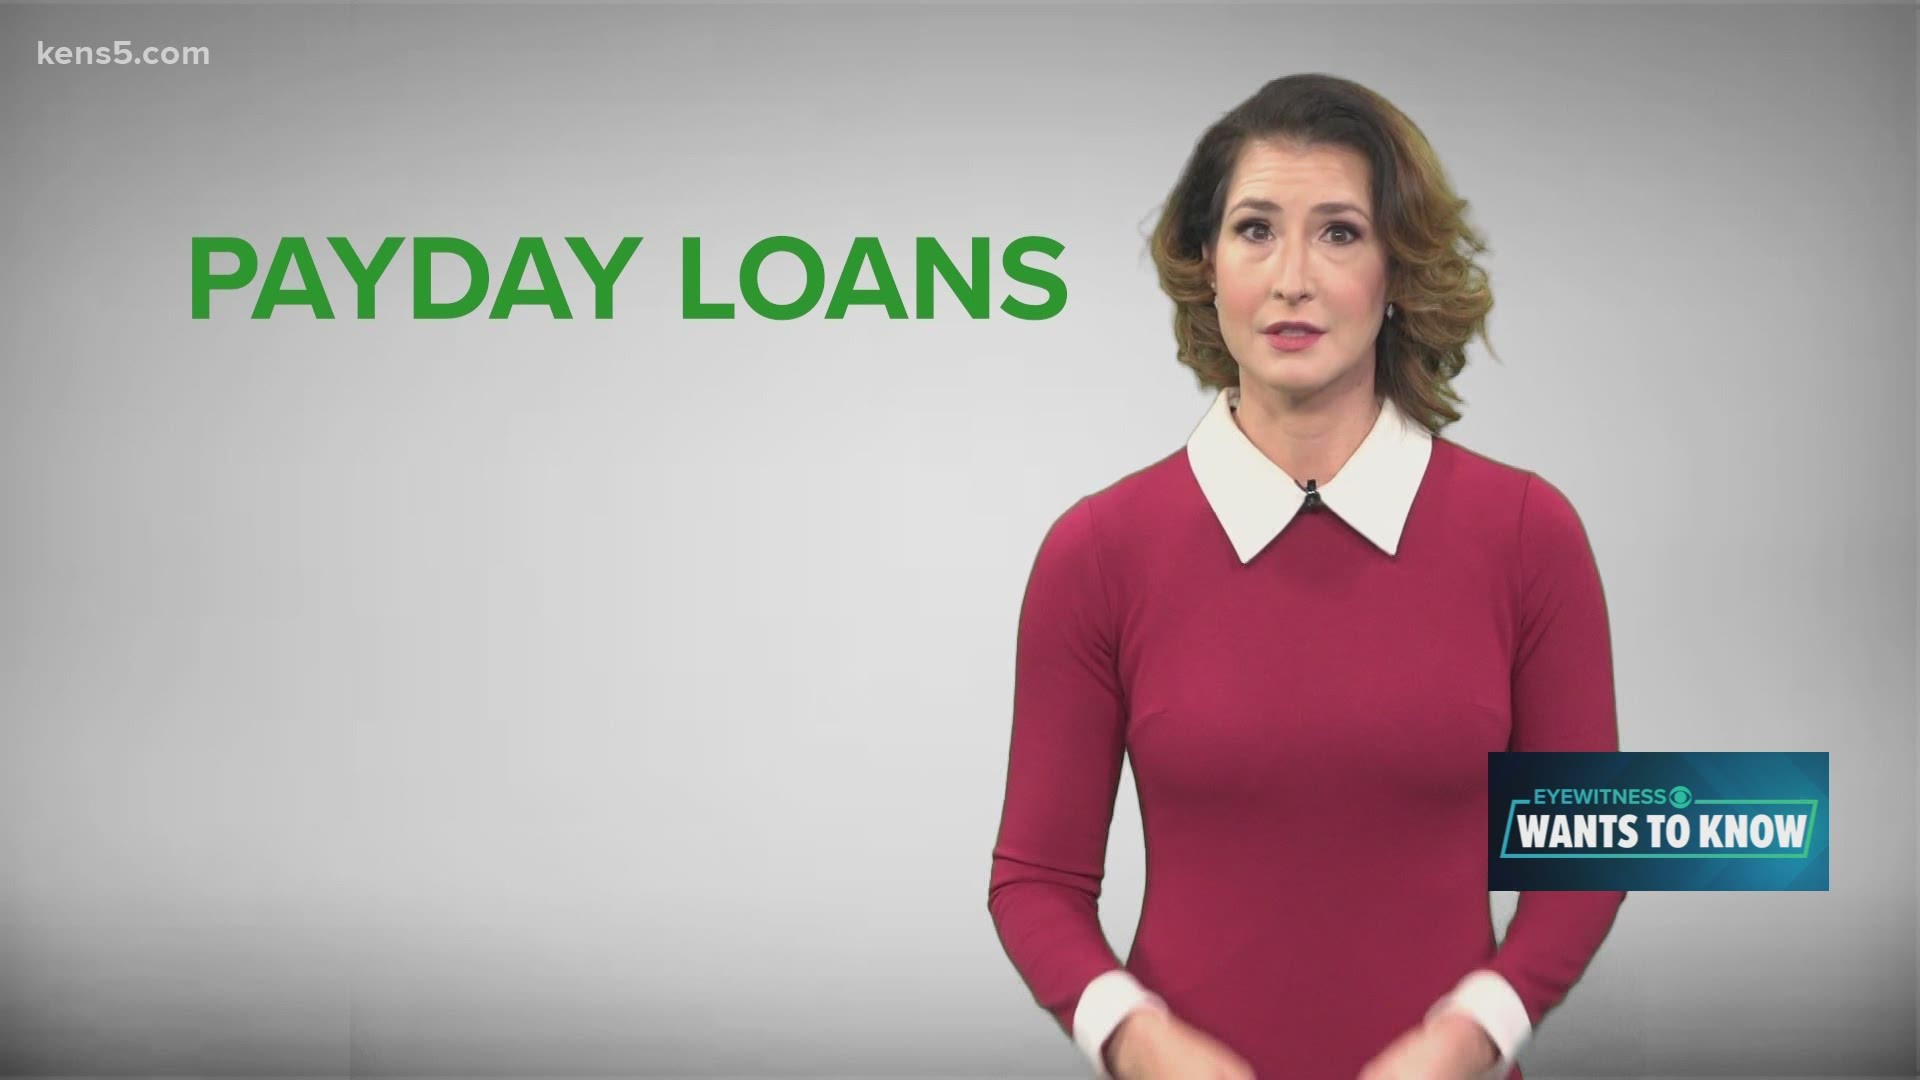 Many are scrambling during the pandemic to figure out how to cover costs for rent, food and utility bills. Here's what to know if you're considering a payday loan.